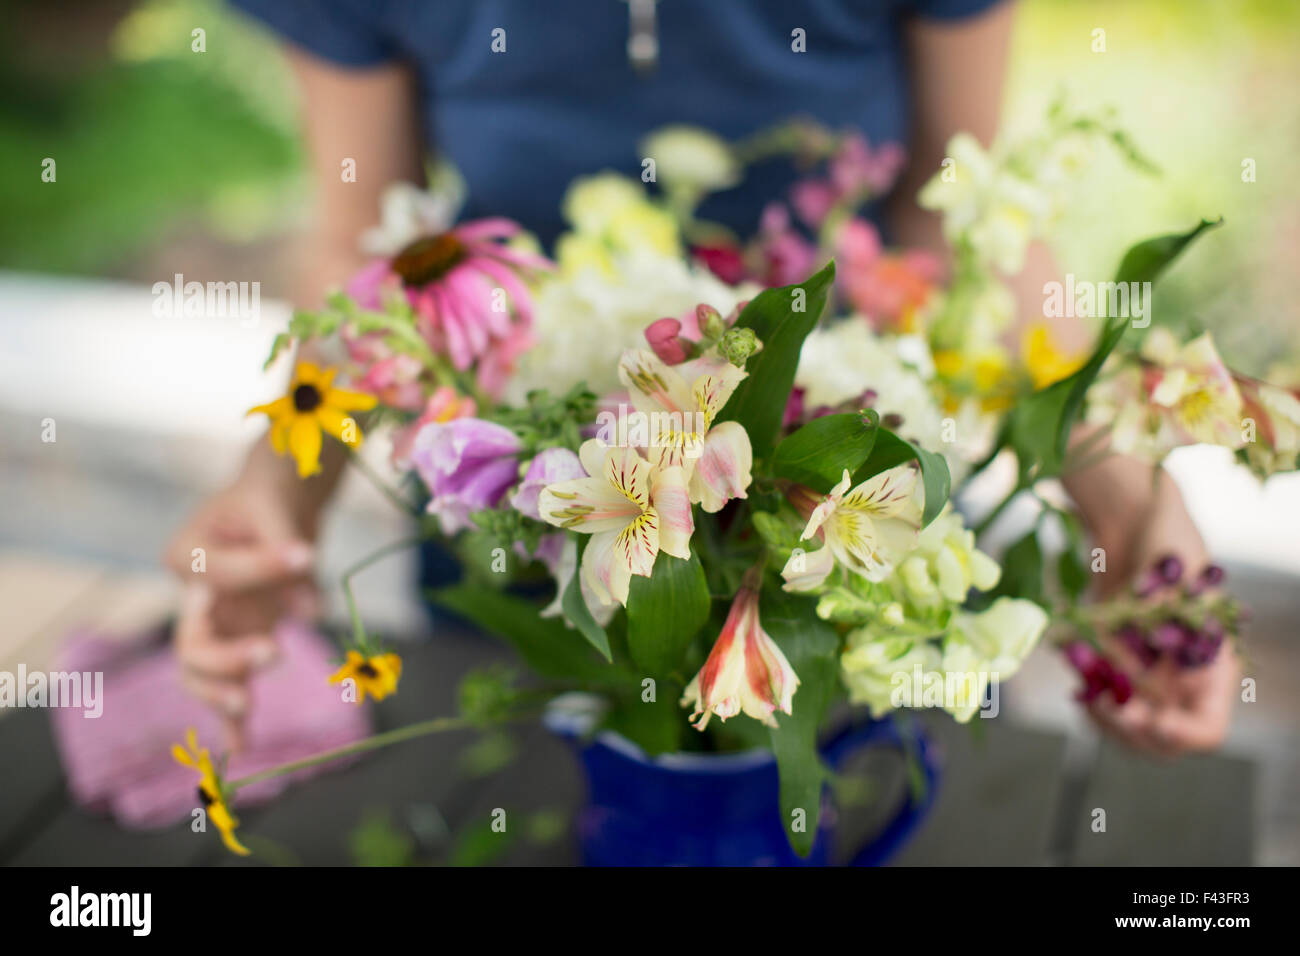 A person arranging a bunch of flowers in a vase. Stock Photo